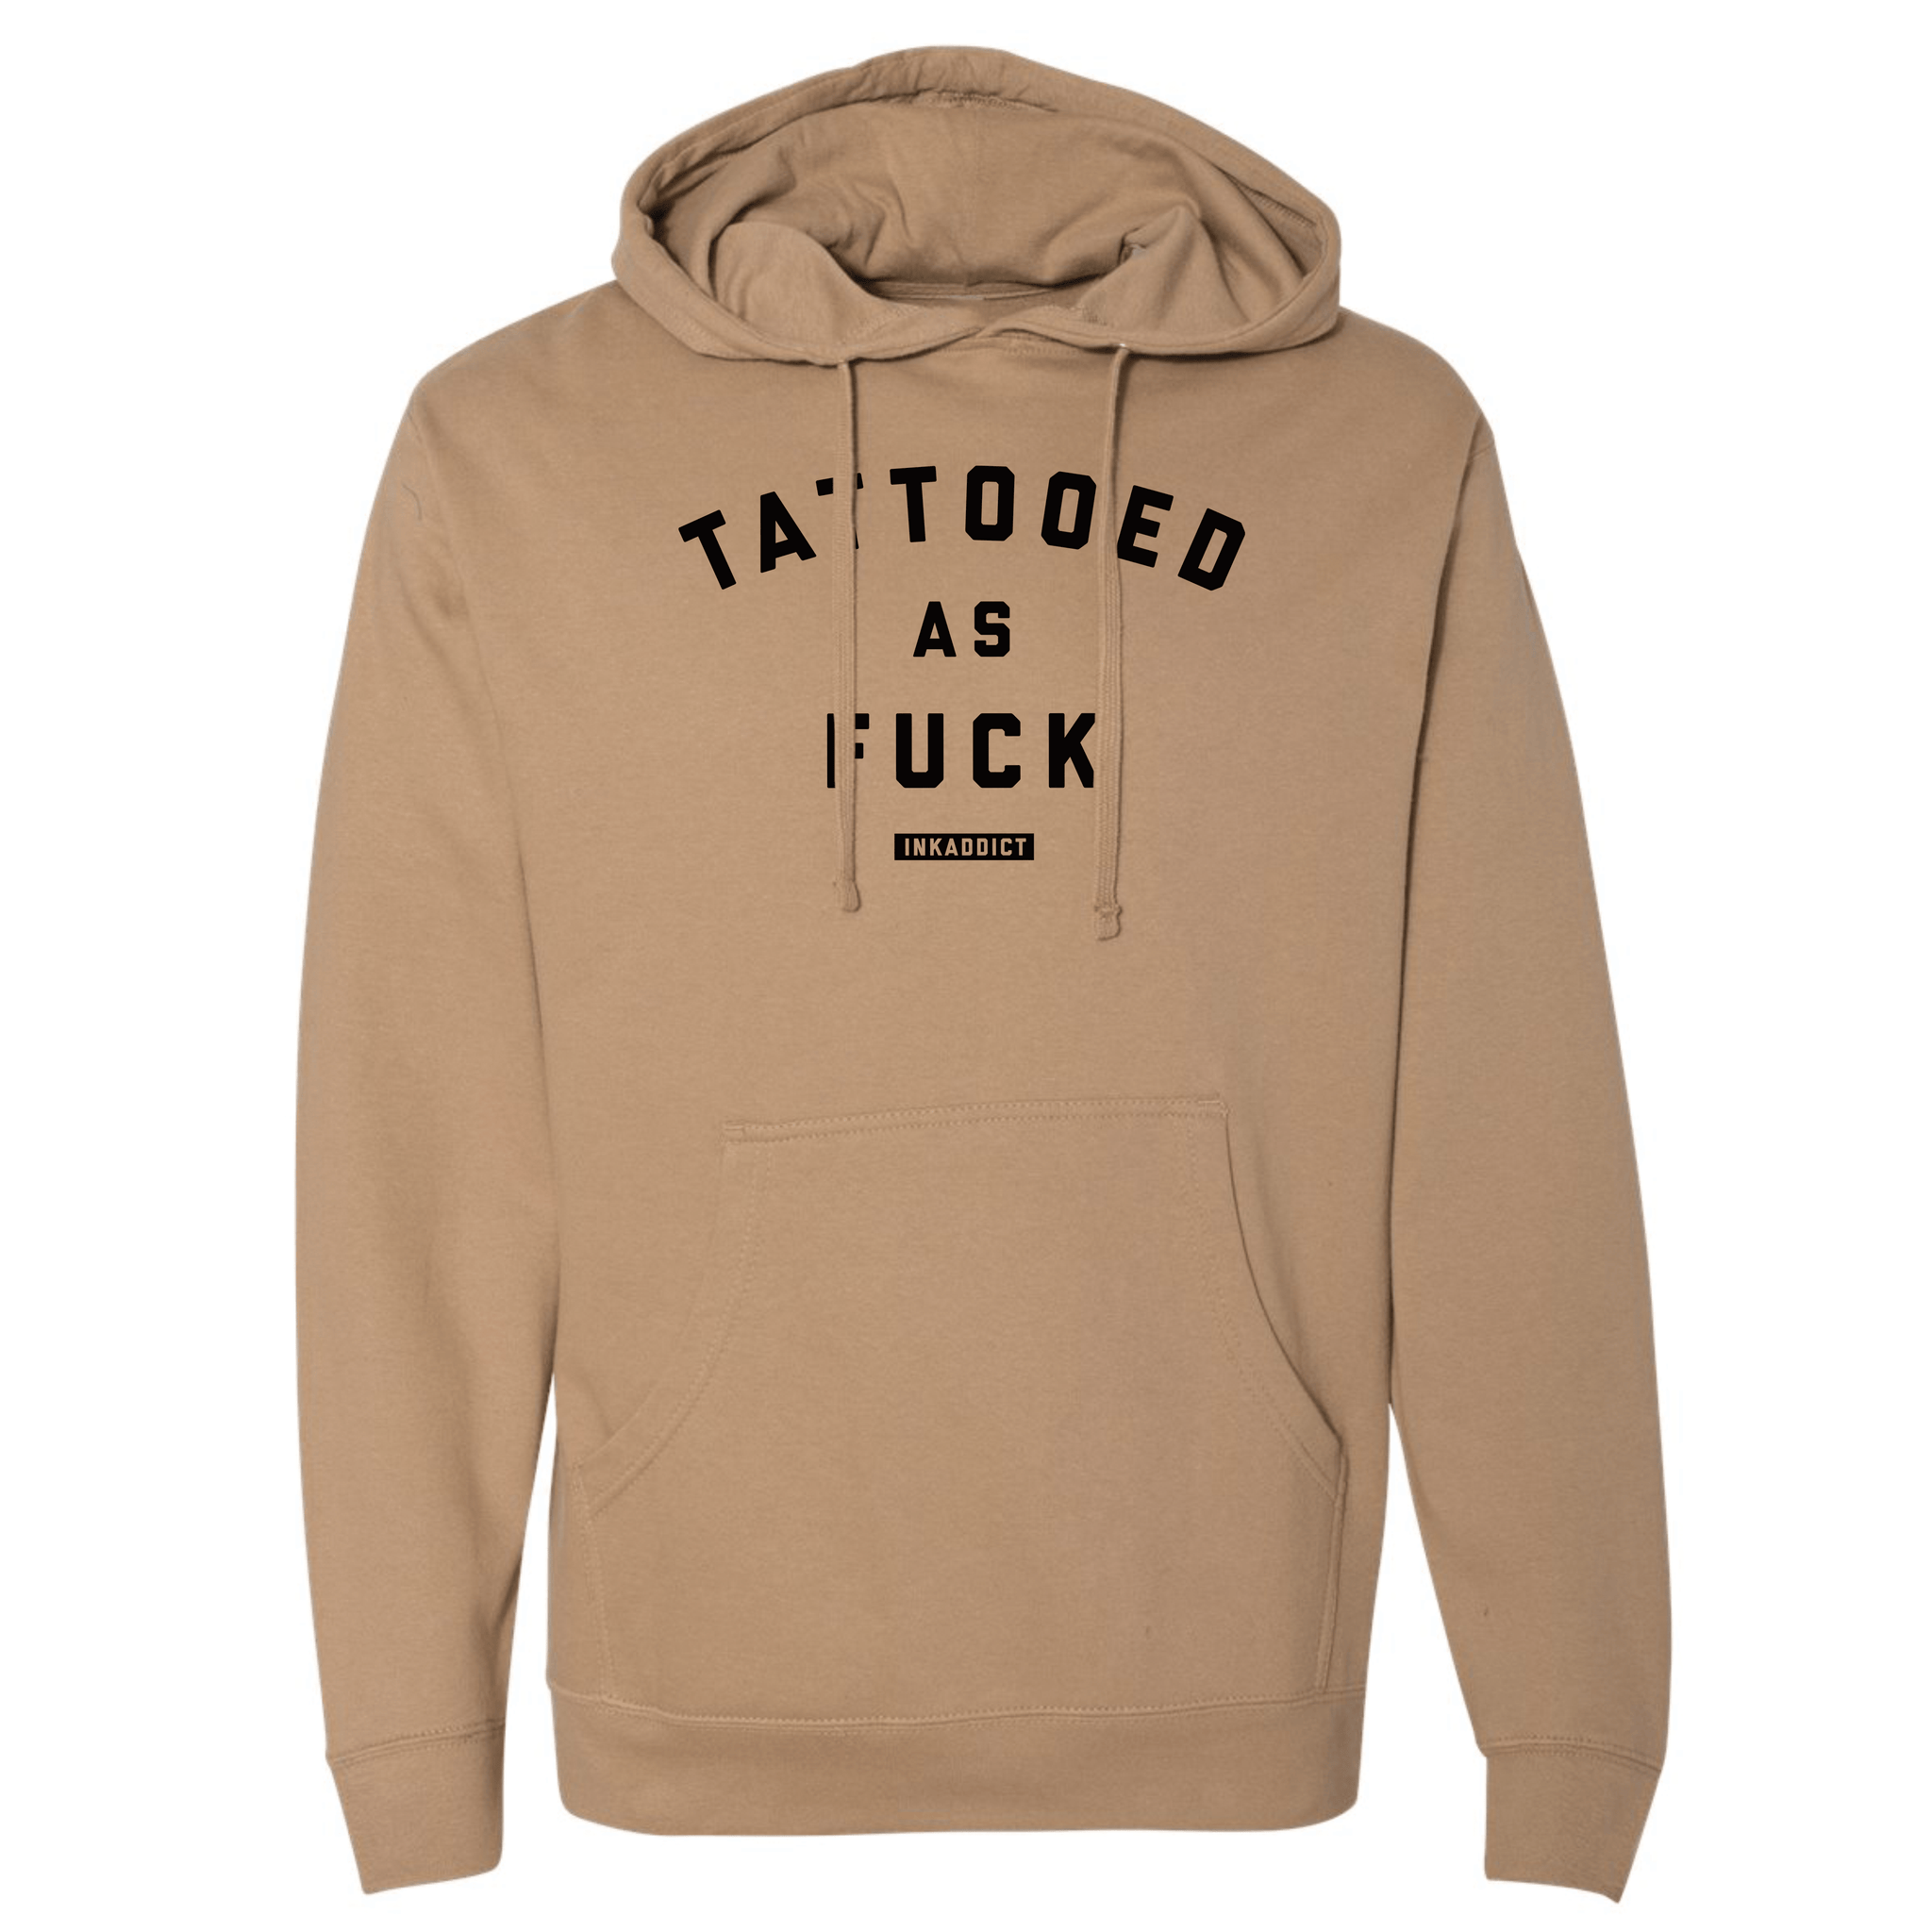 Tattooed As Fuck Fall Collection Men's Hoodie